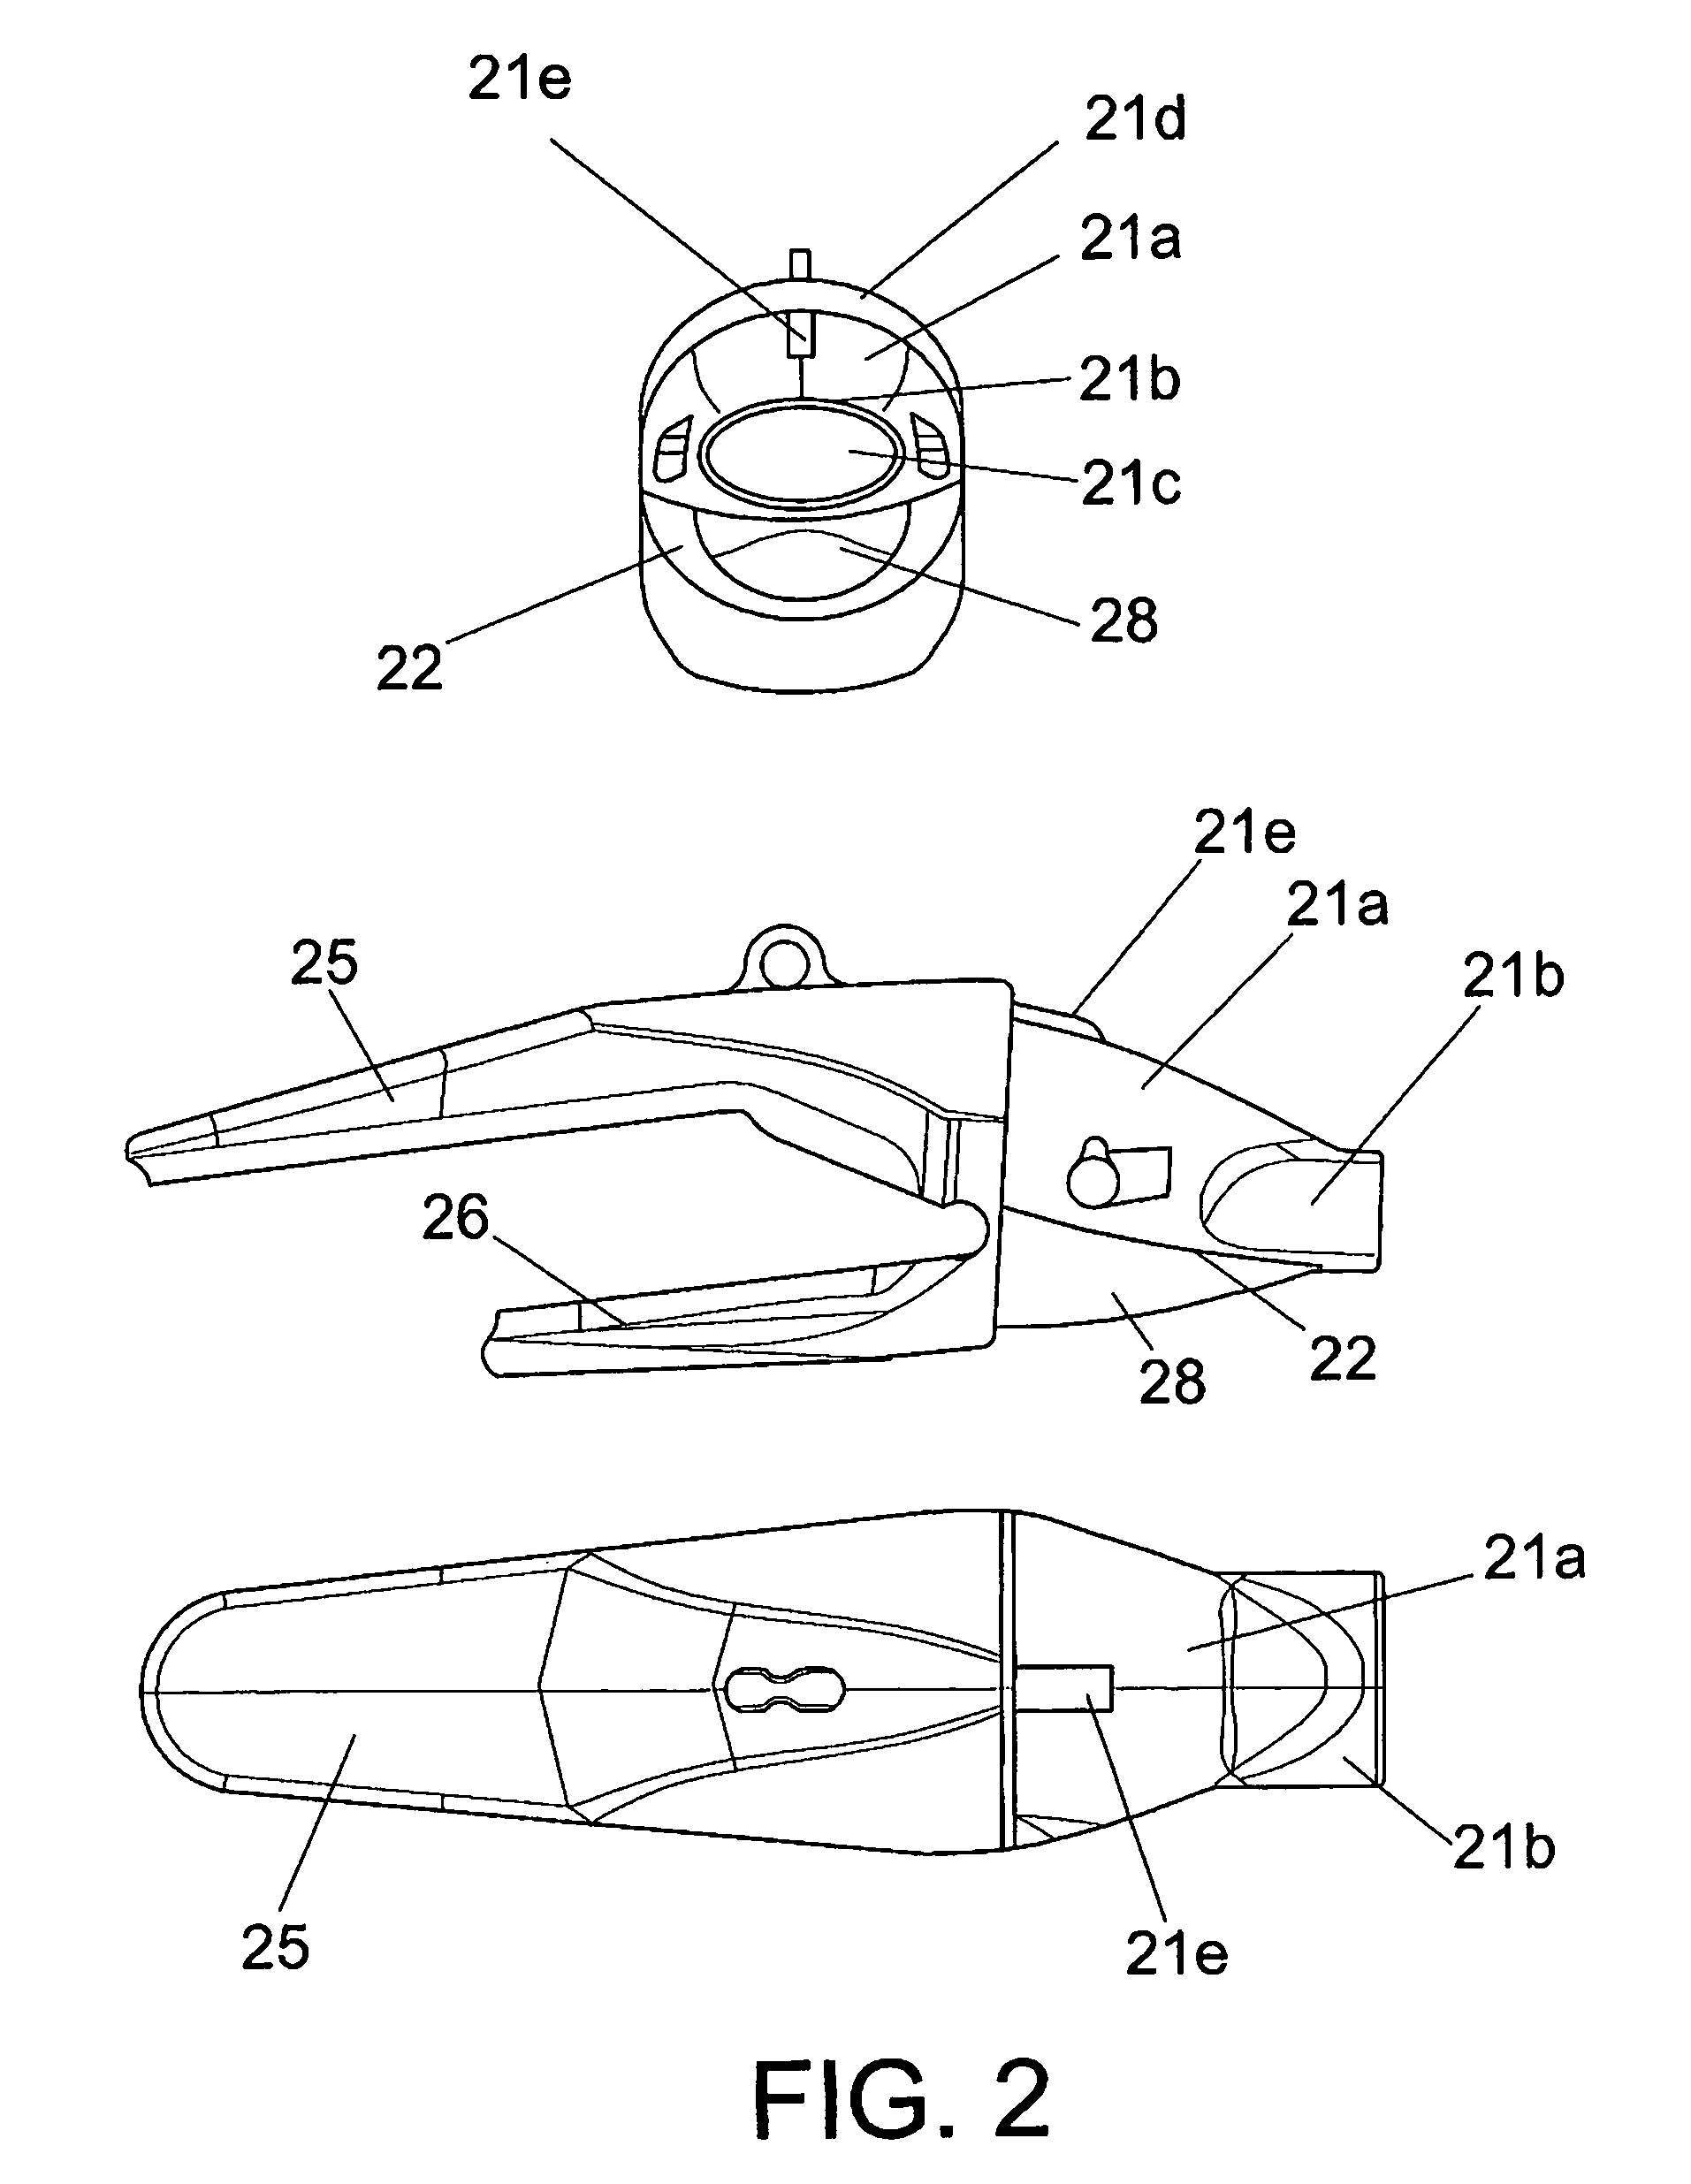 Wear assembly and components thereof, which is intended for machines that are used to move materials such as earth and stones